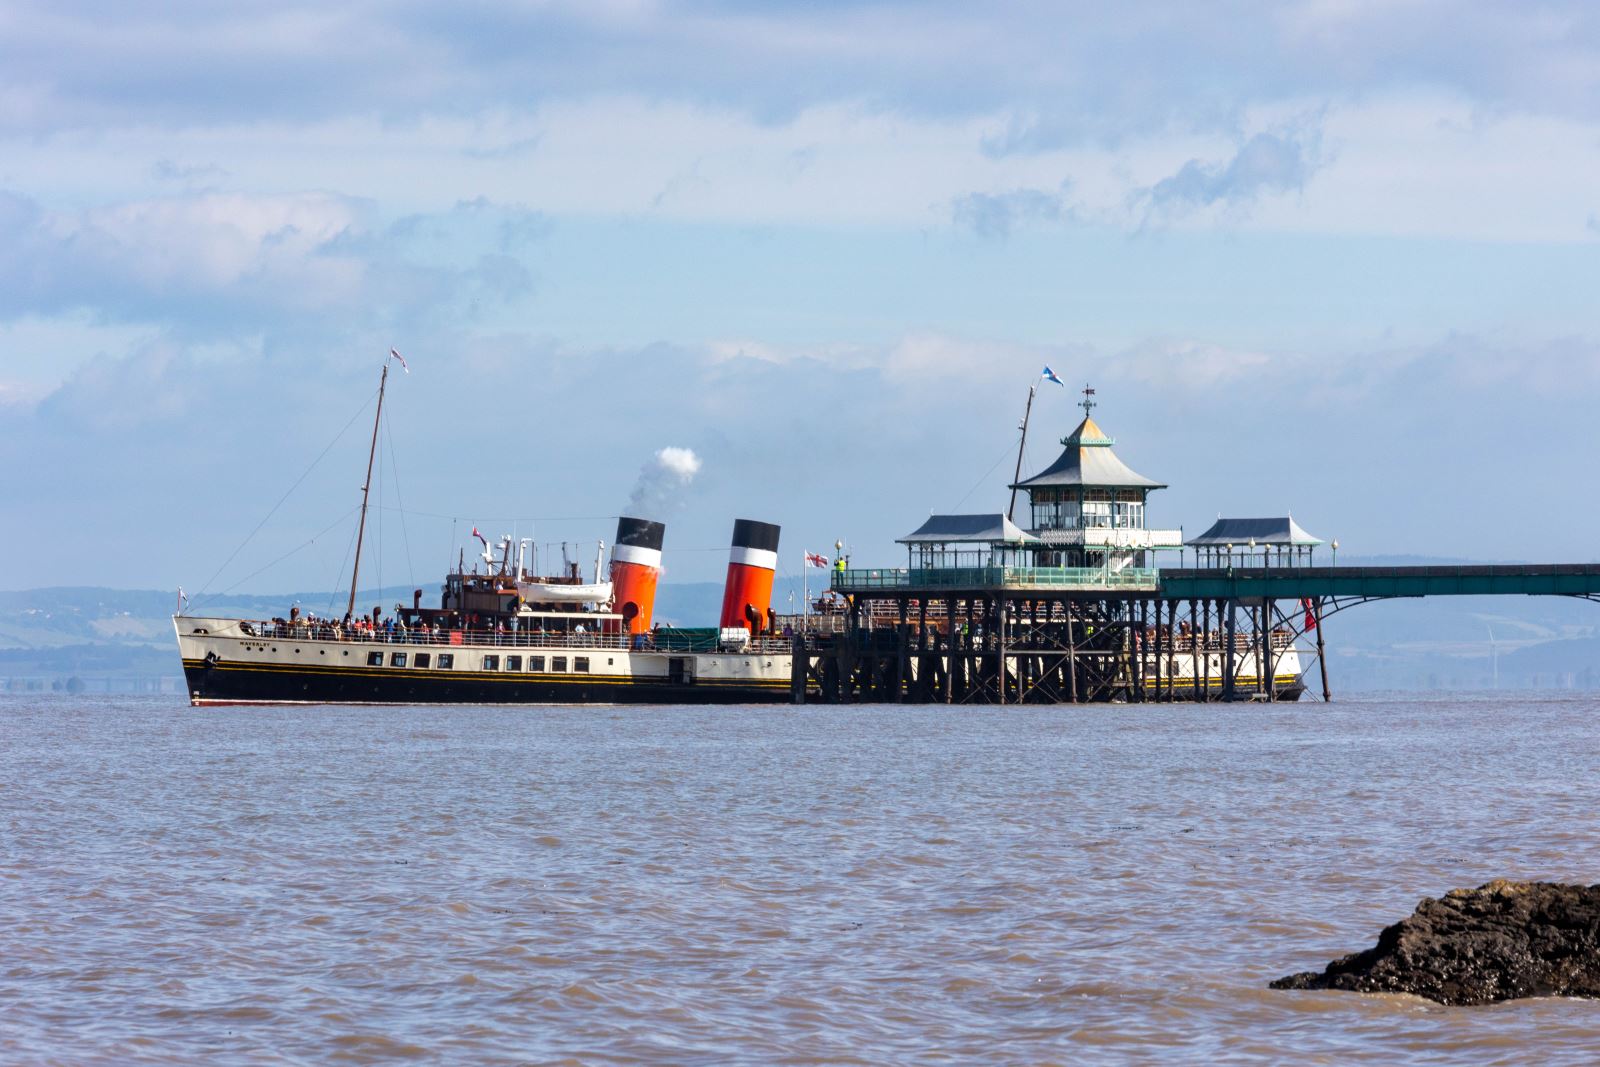 A large paddle steamer about to depart from a pier